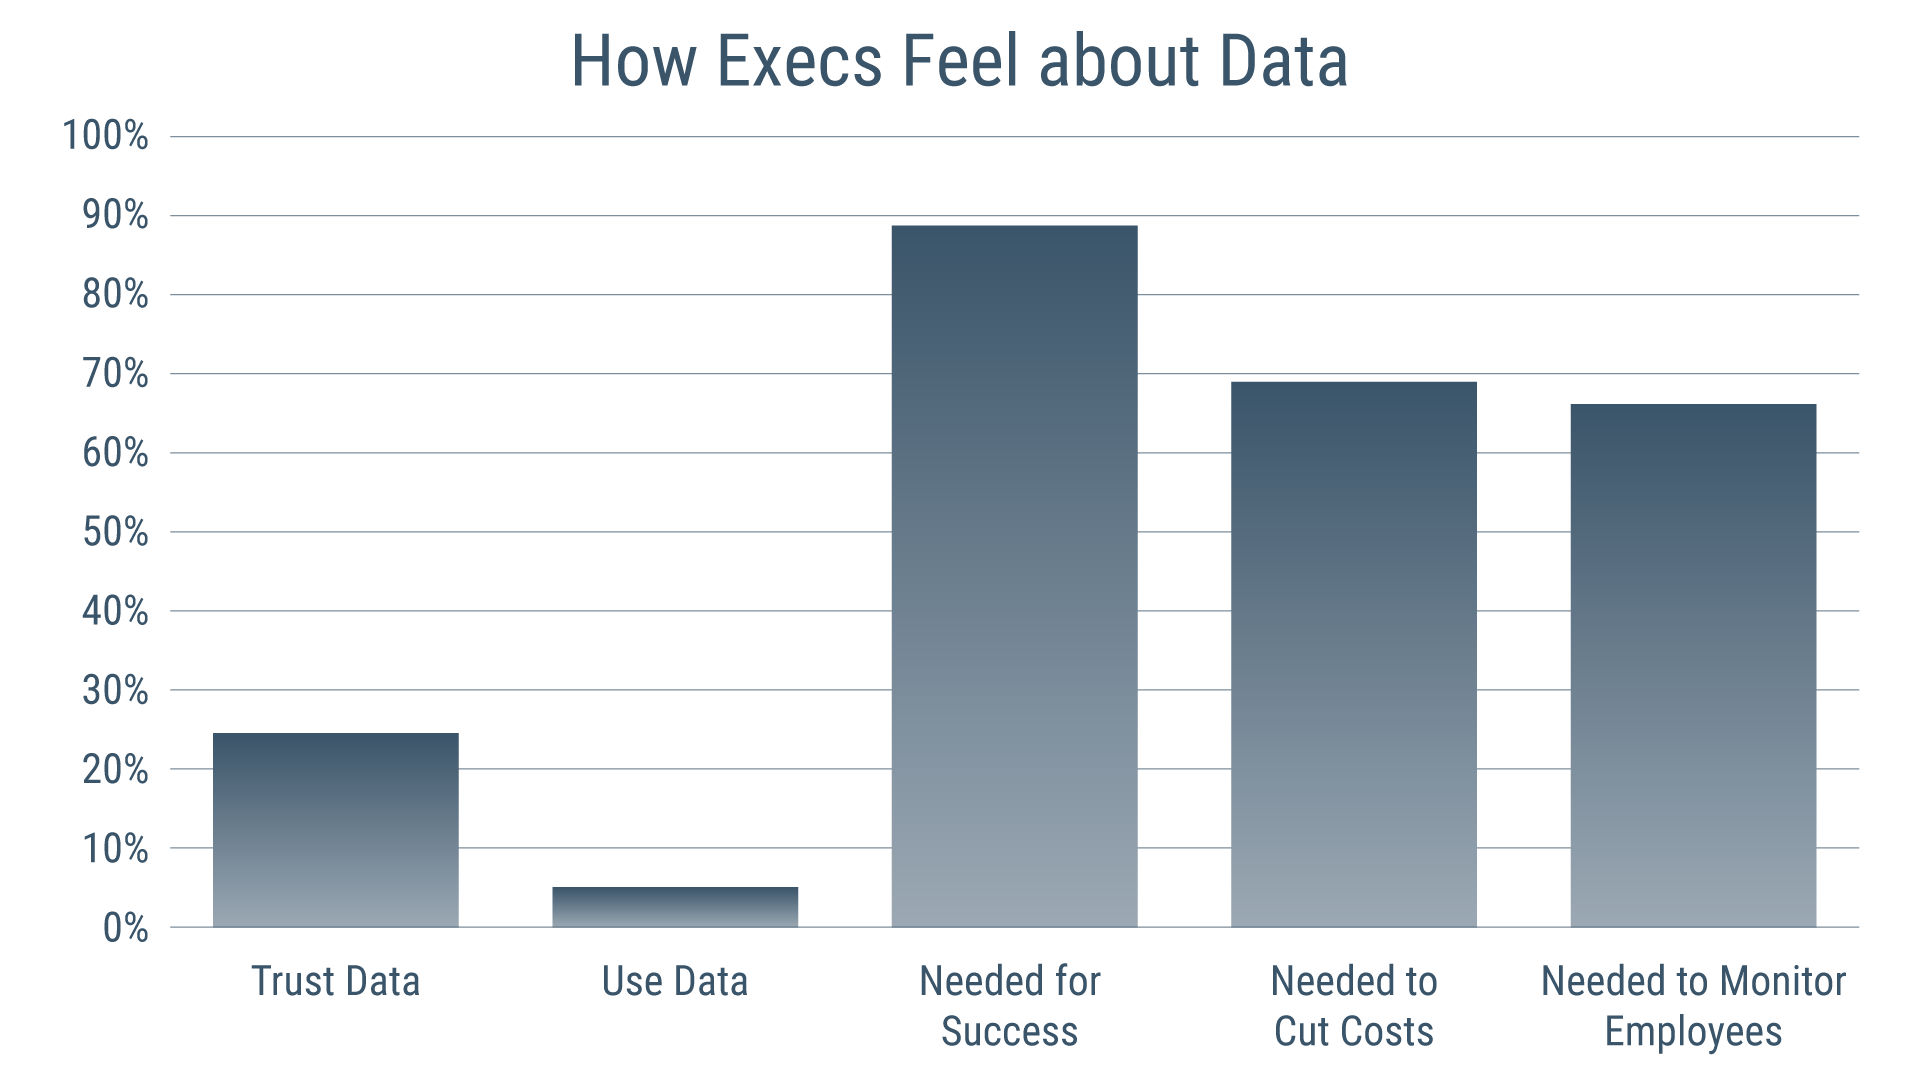 a graph showing percentages of how executives feel about data